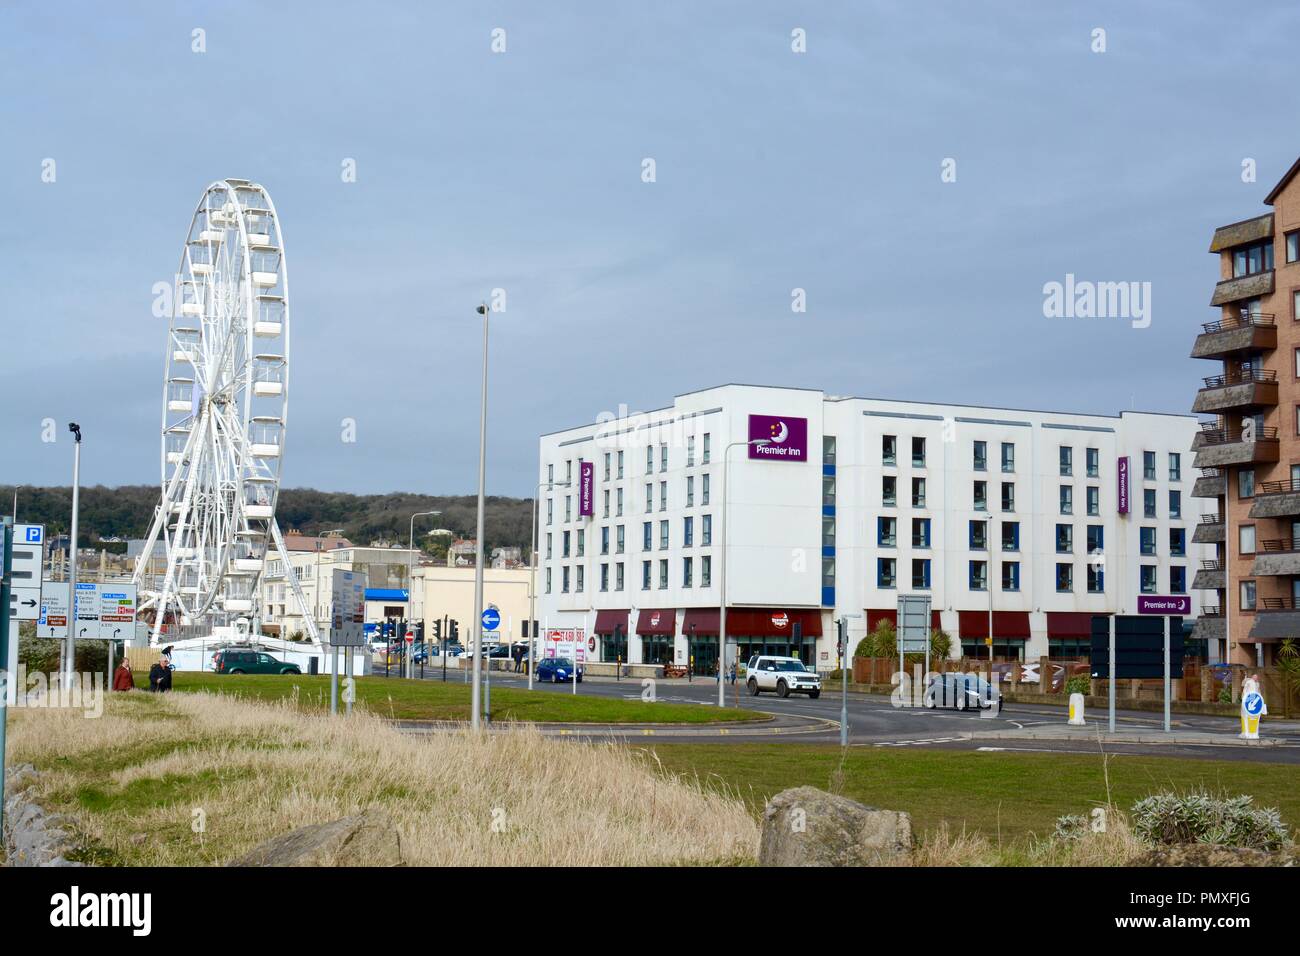 Weston Super Mare seafront, with Premier Inn hotel and Weston wheel in view, Weston Super Mare, Somerset, England, UK Stock Photo